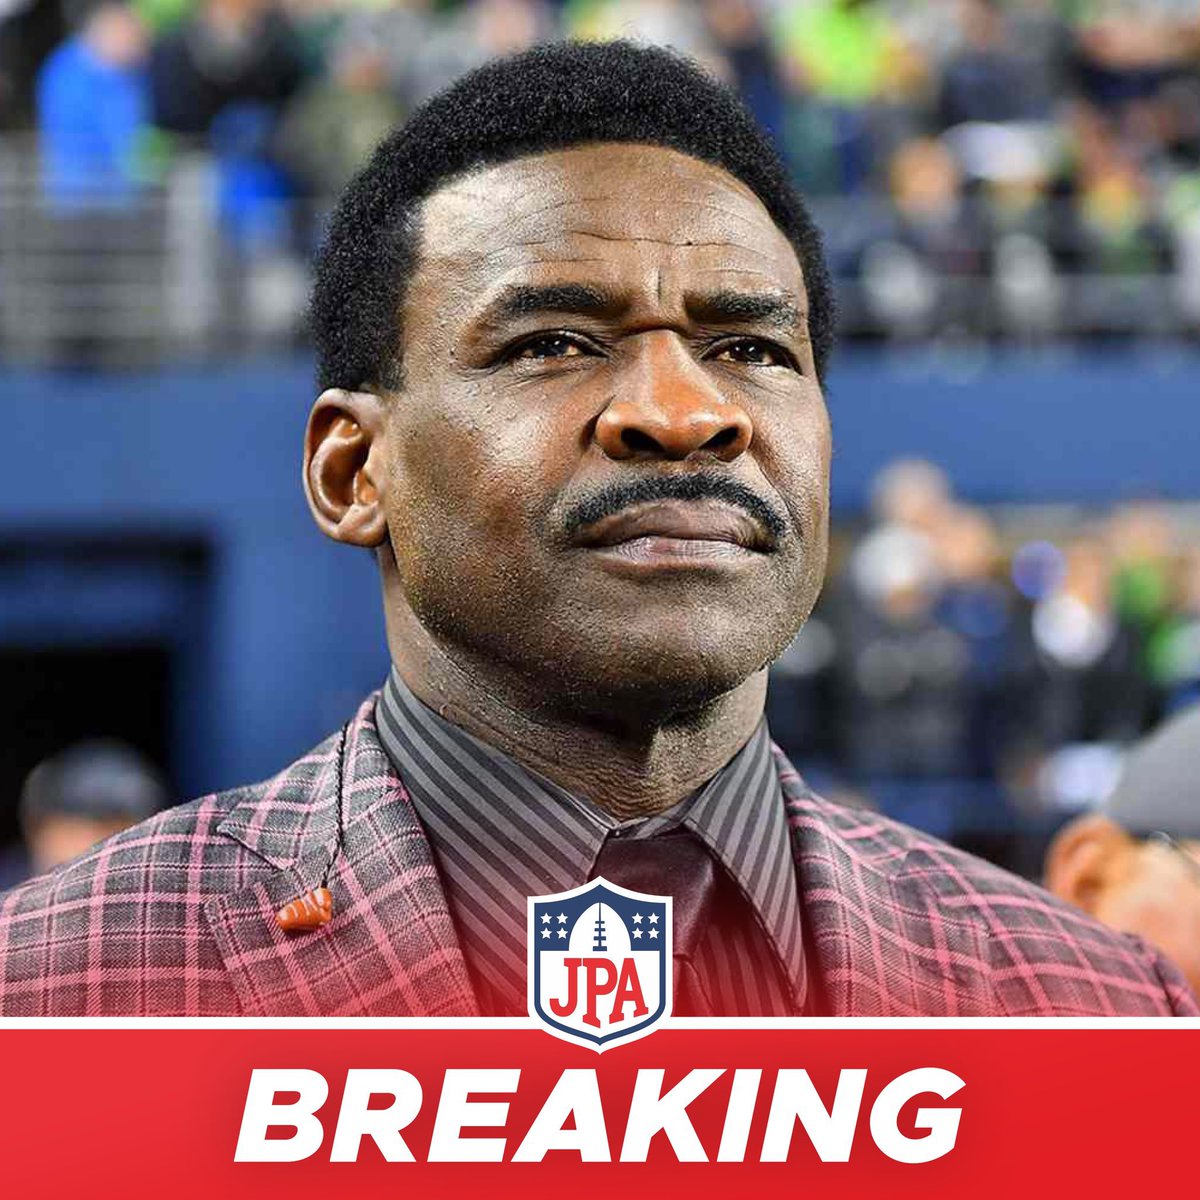 Michael Irvin was let go from the NFL network today. Where should he work next?